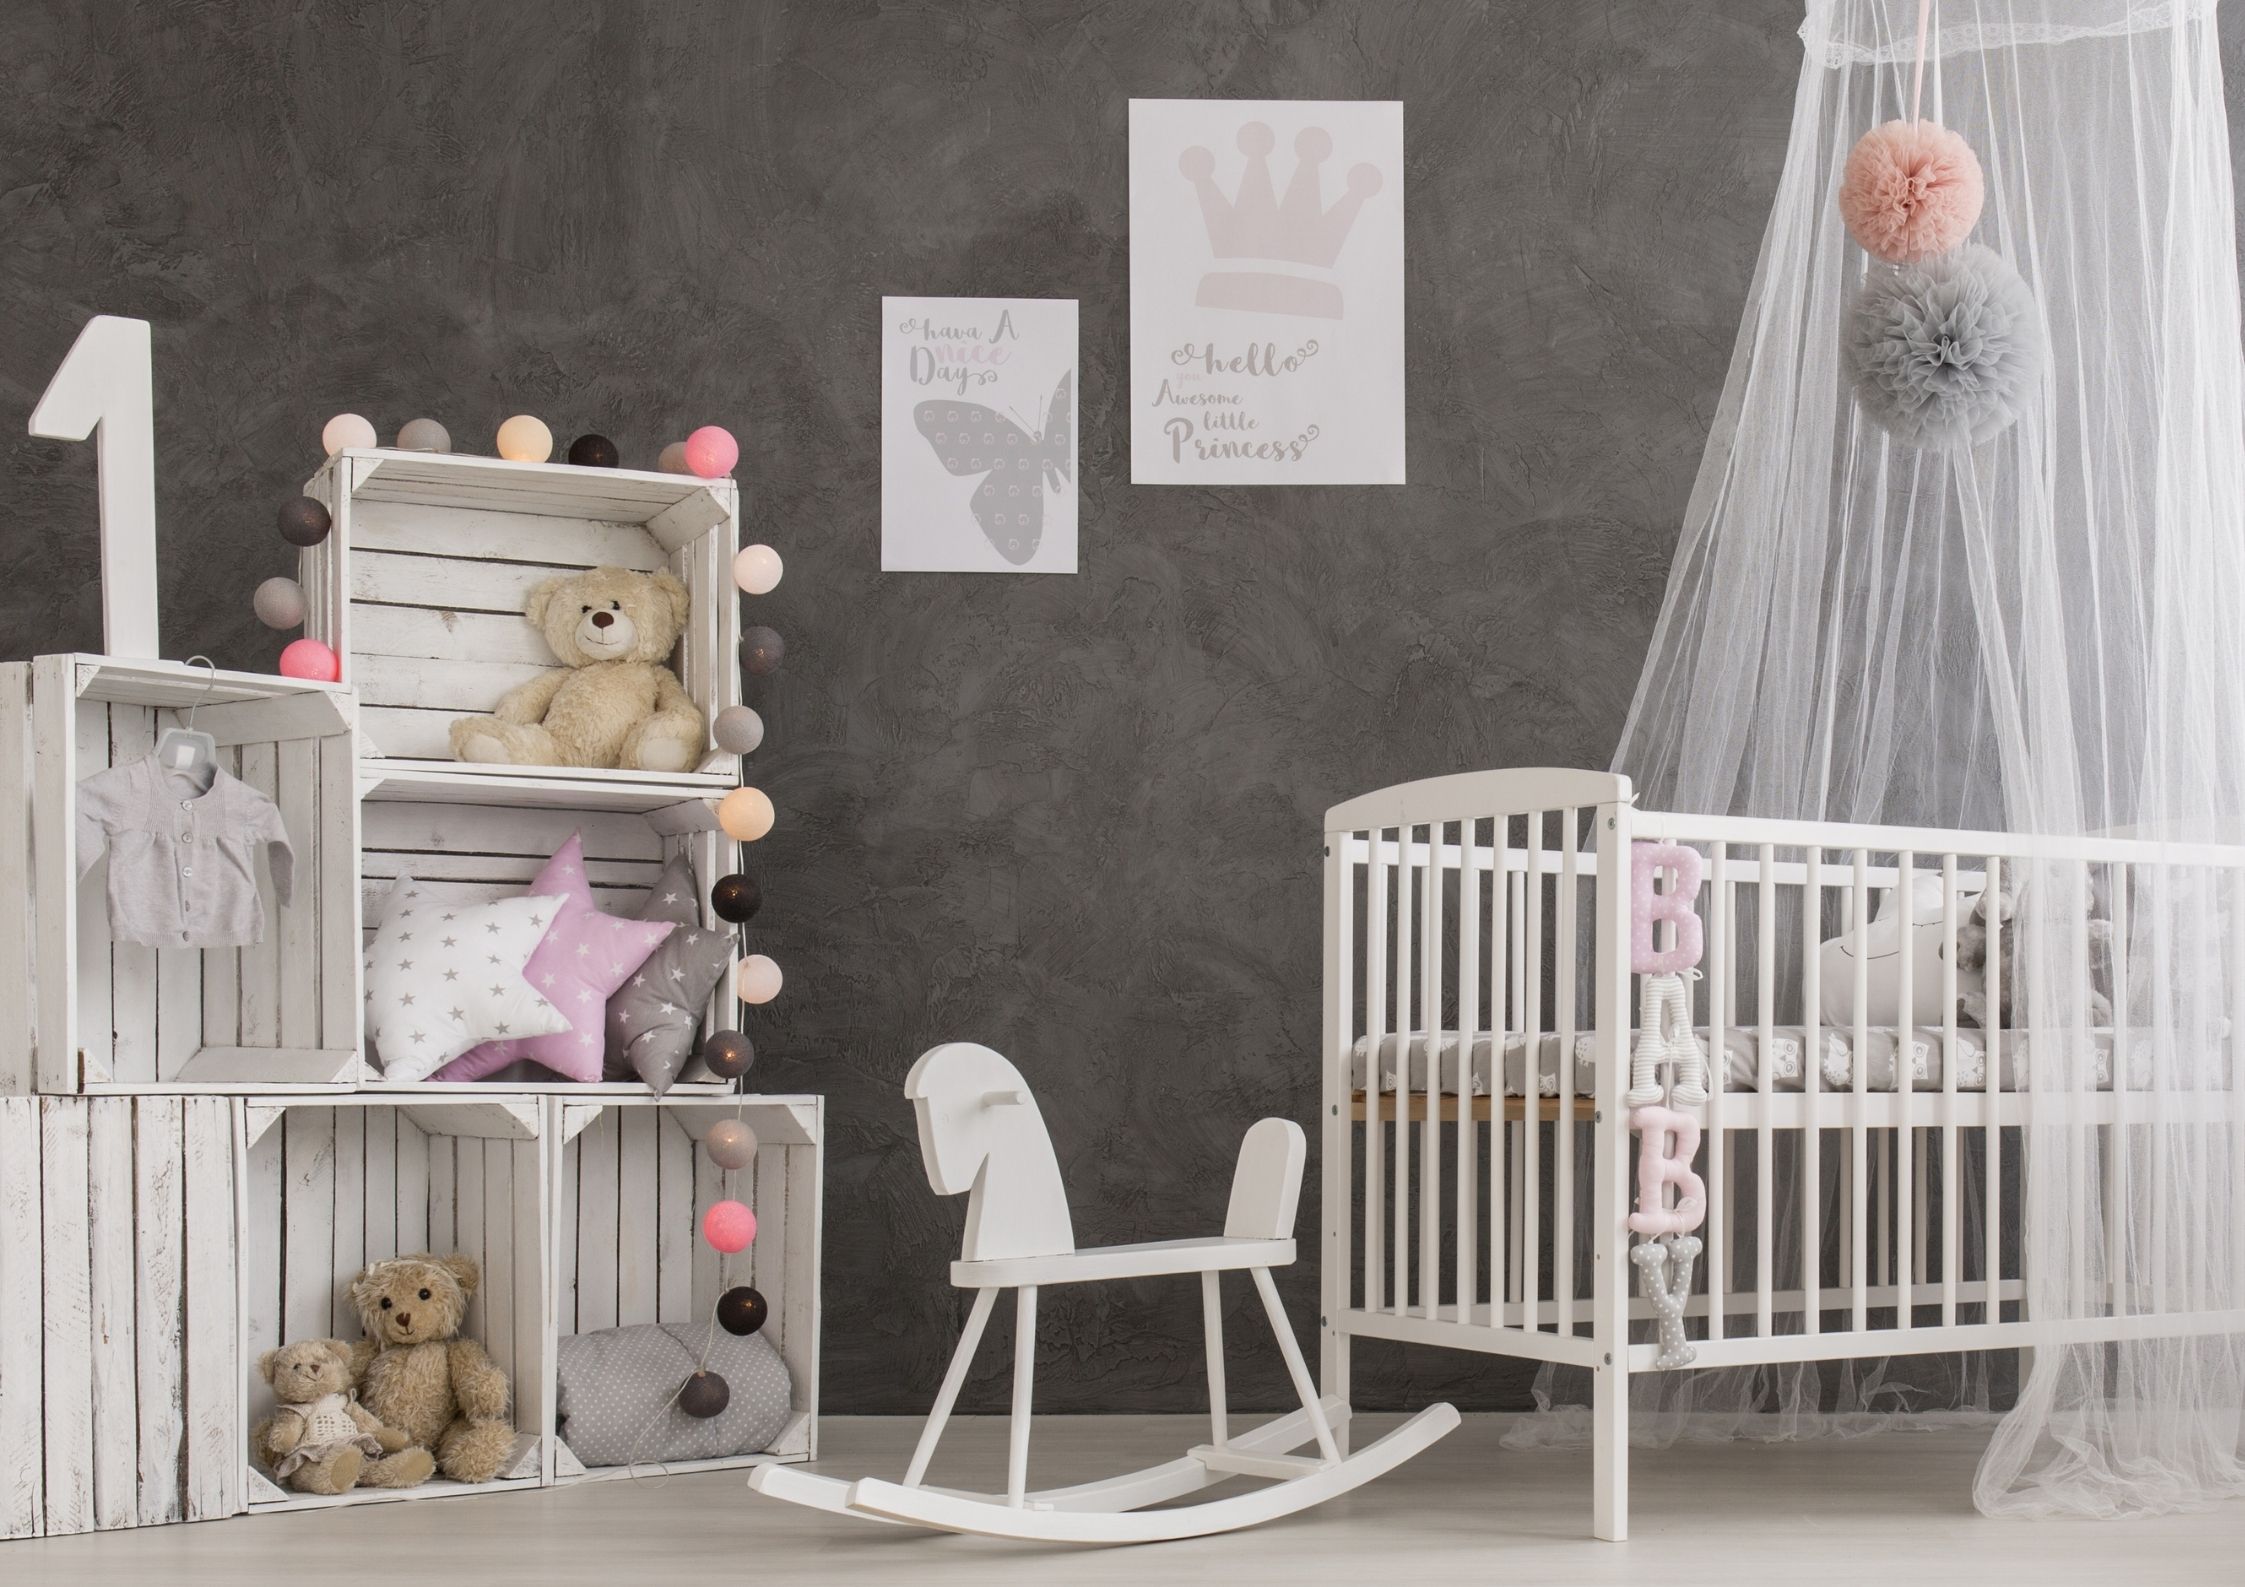 Designing the perfect nursery for your newborn